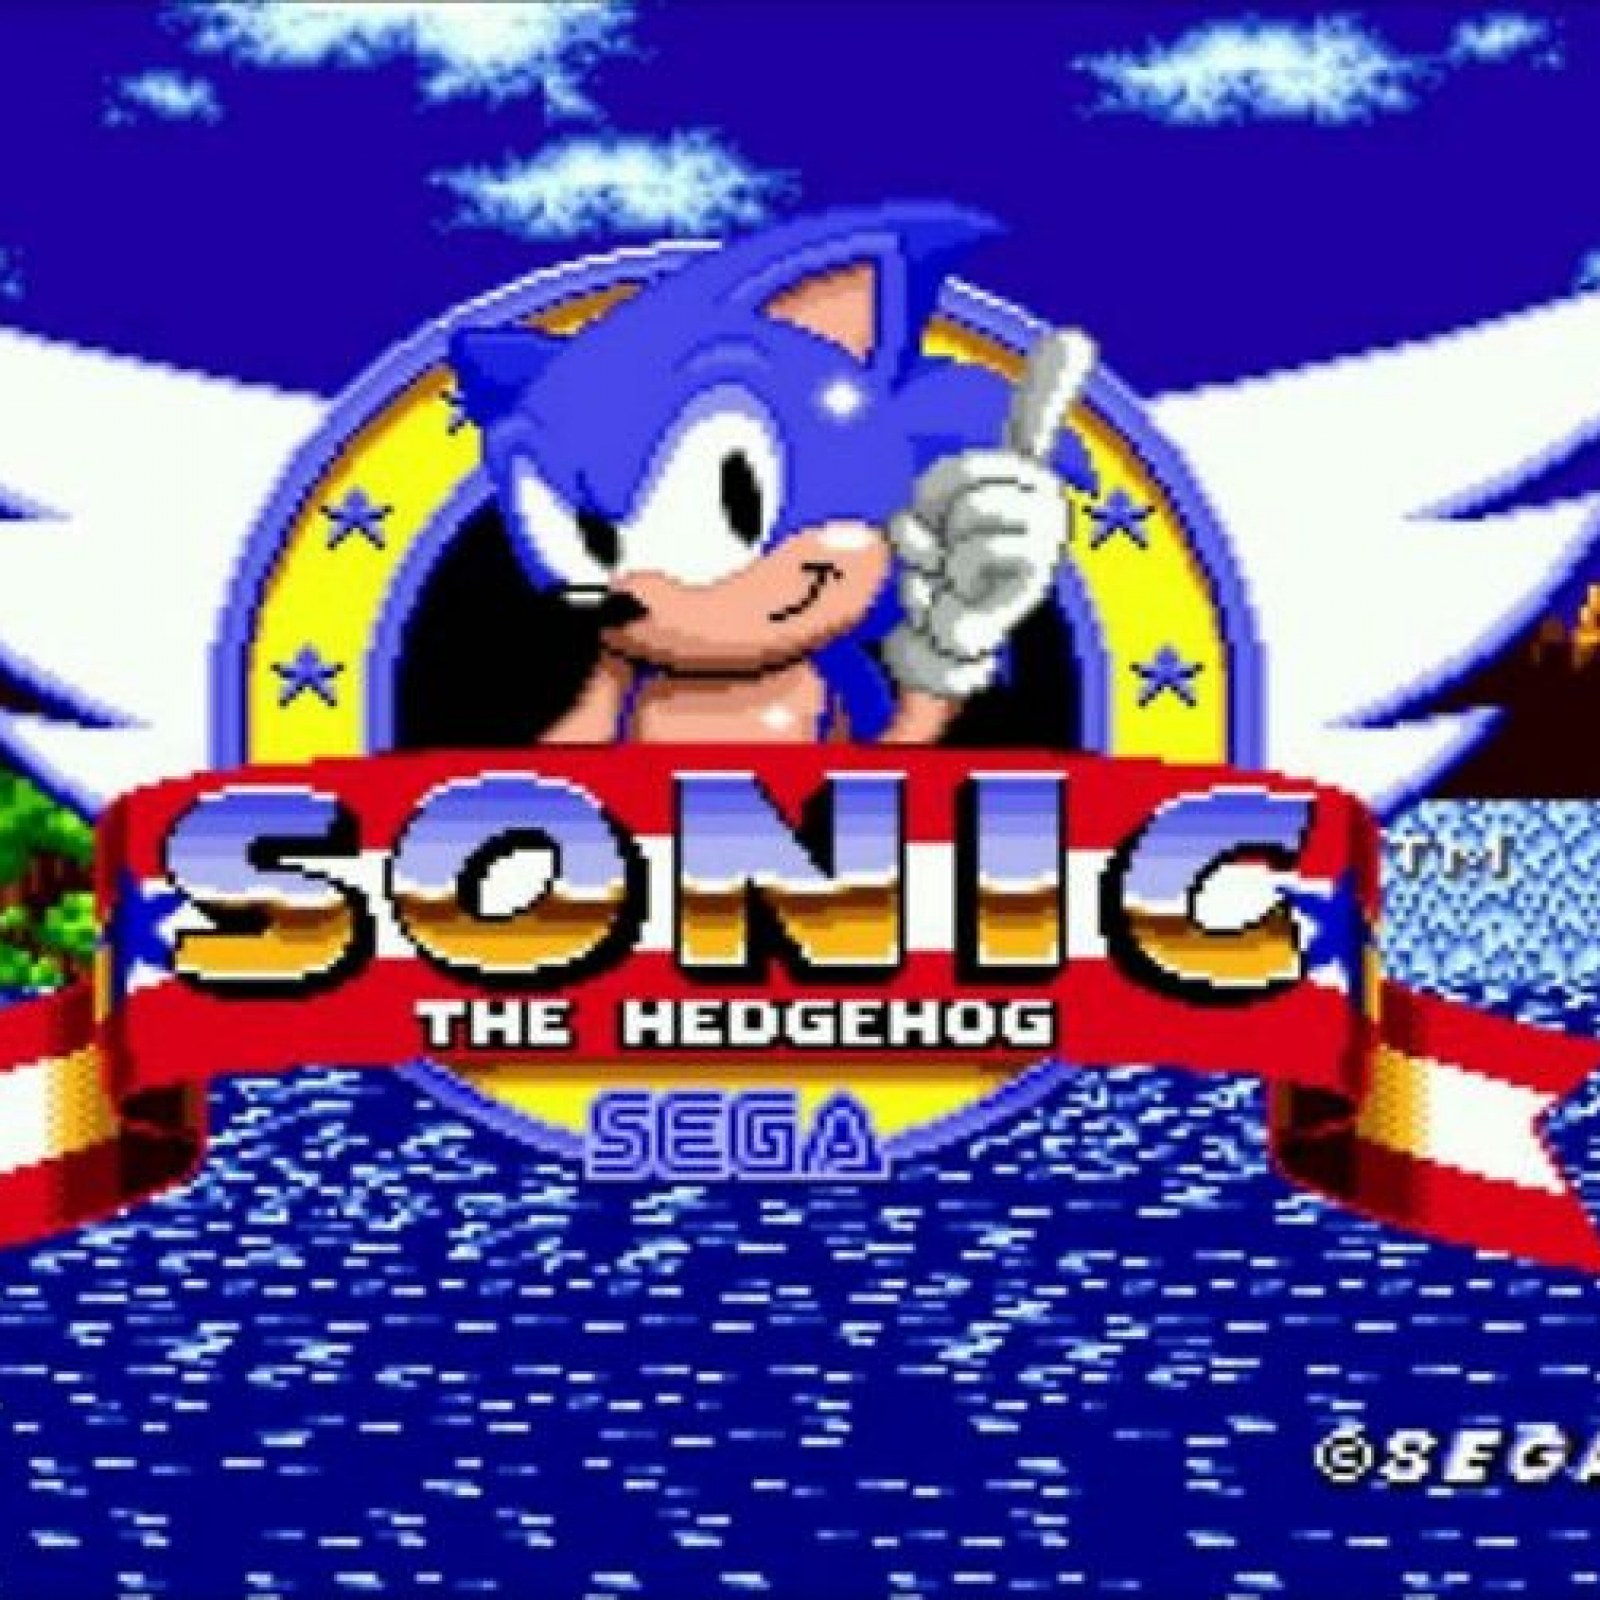 Music of Sonic the Hedgehog - Wikiwand